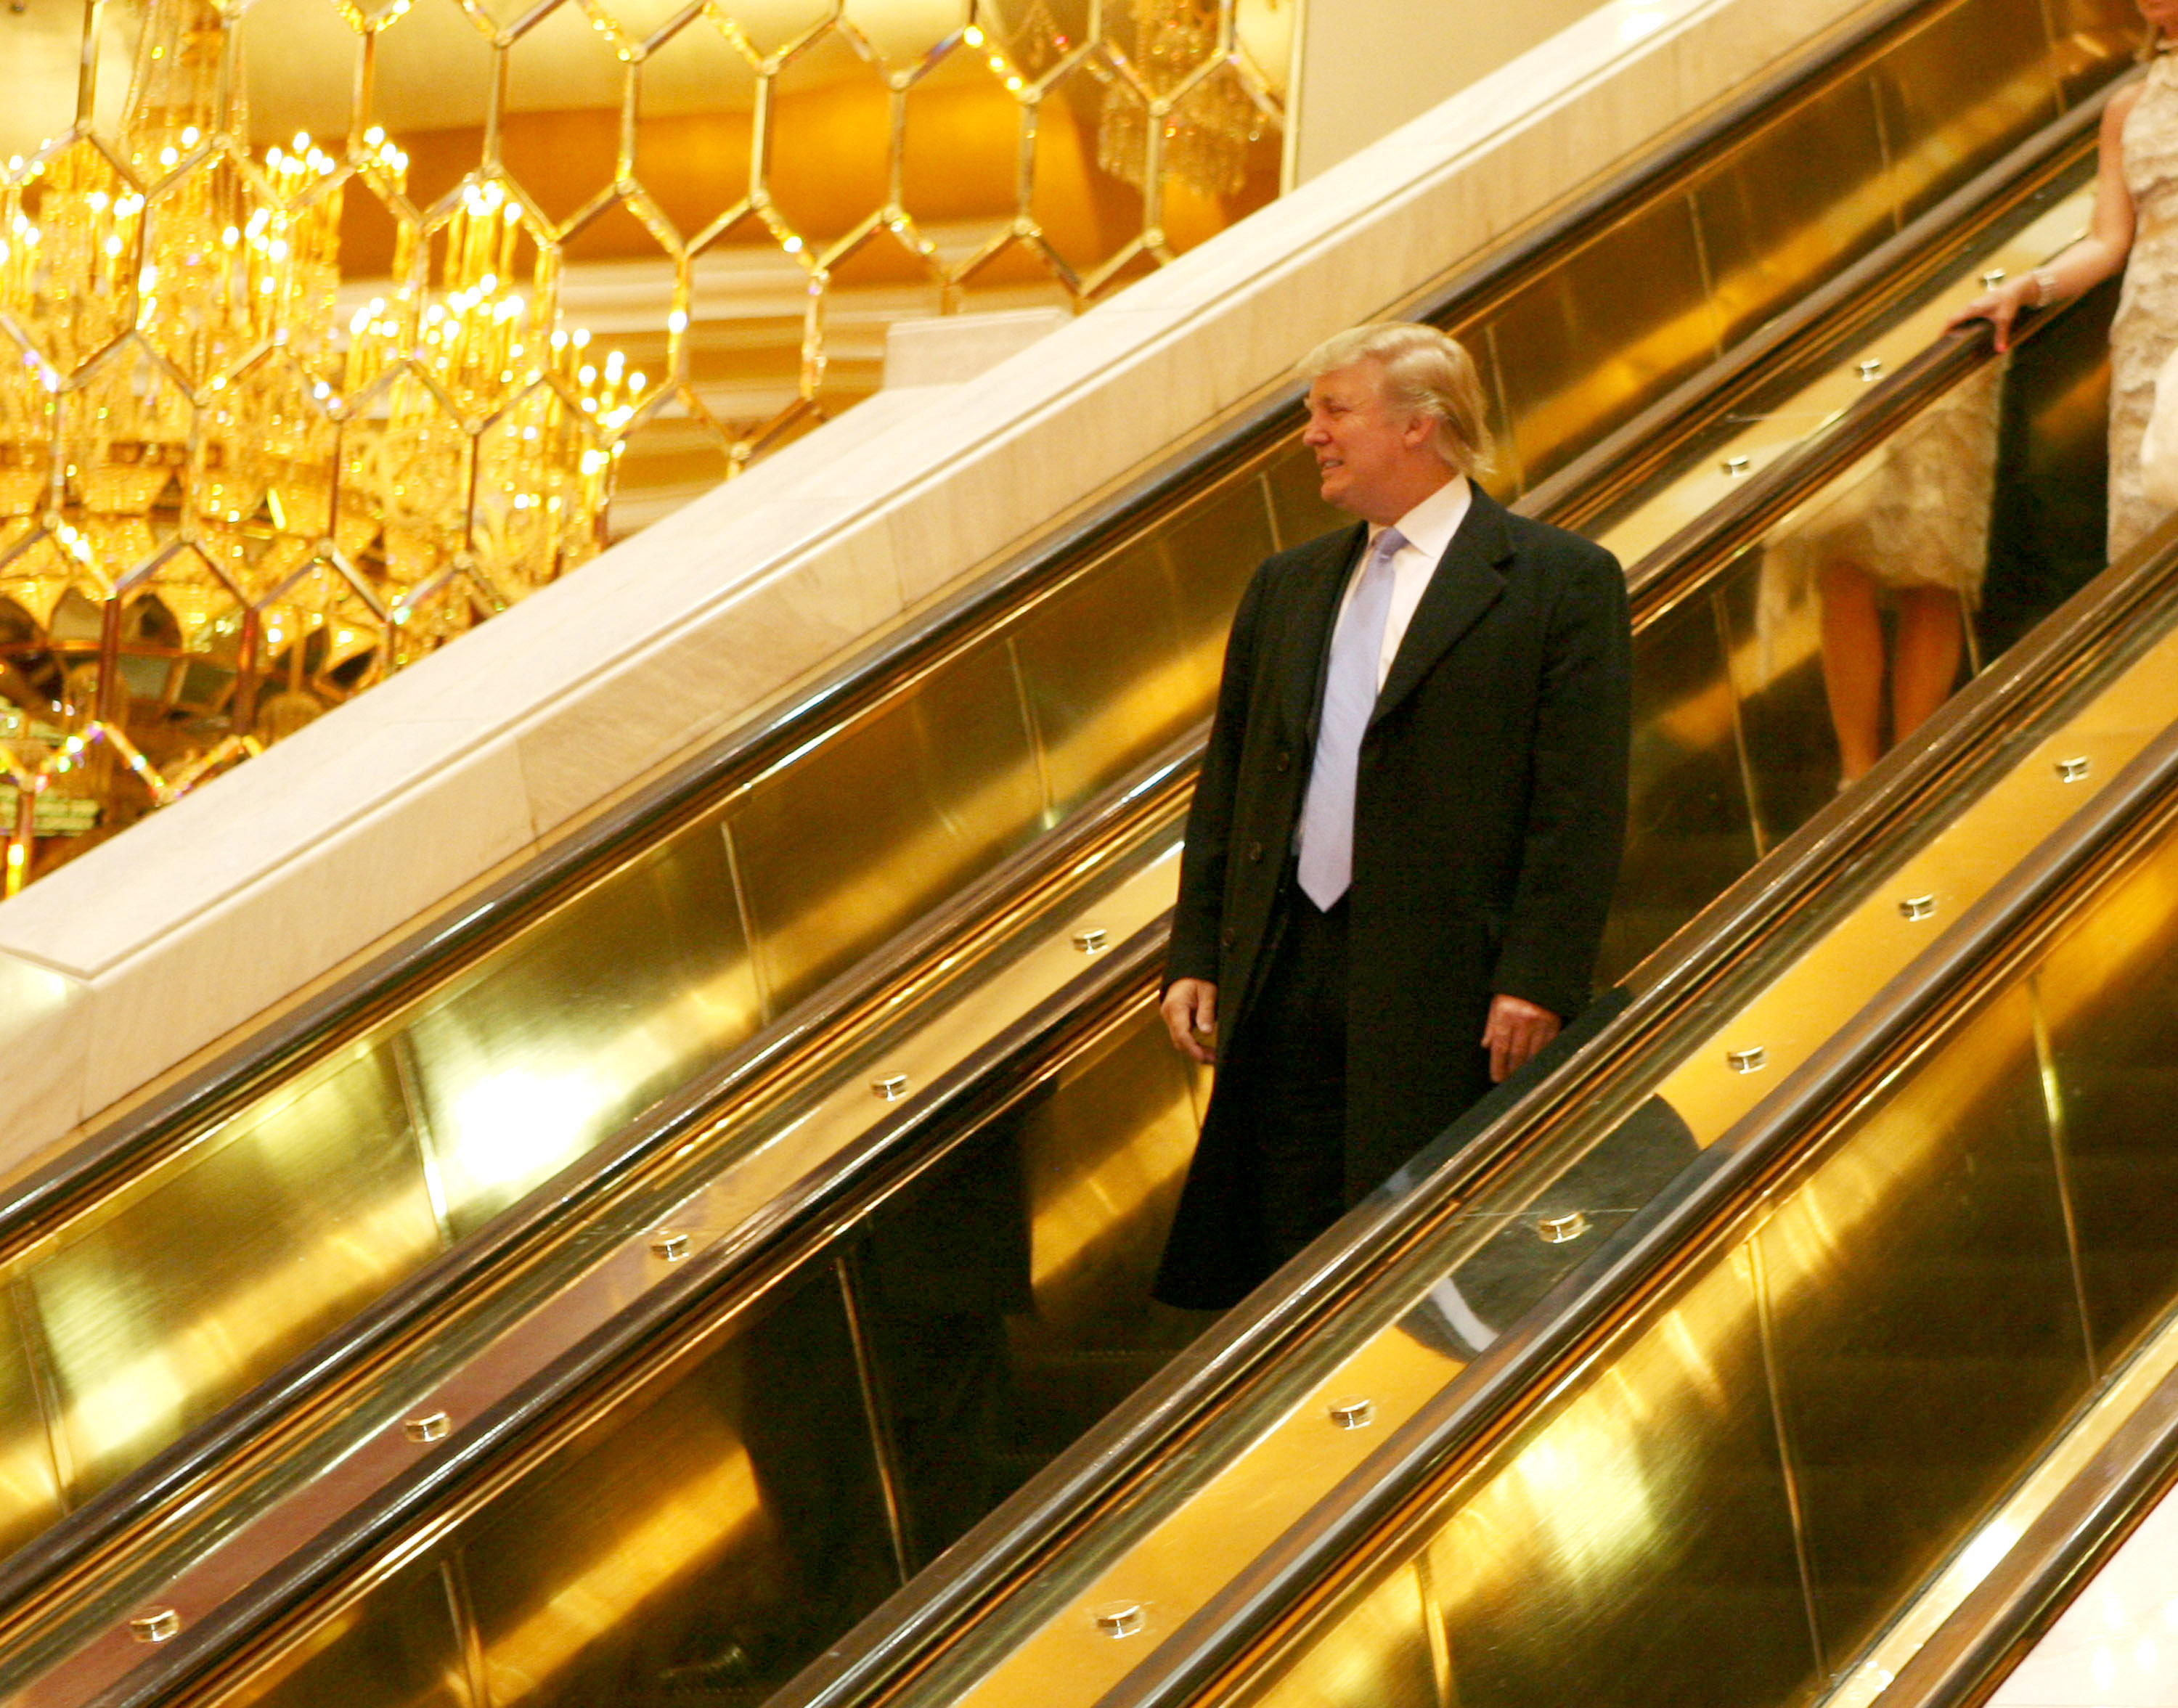 Foursquare: Donald Trump's Campaign Has Wreaked Havoc on His Business Brand